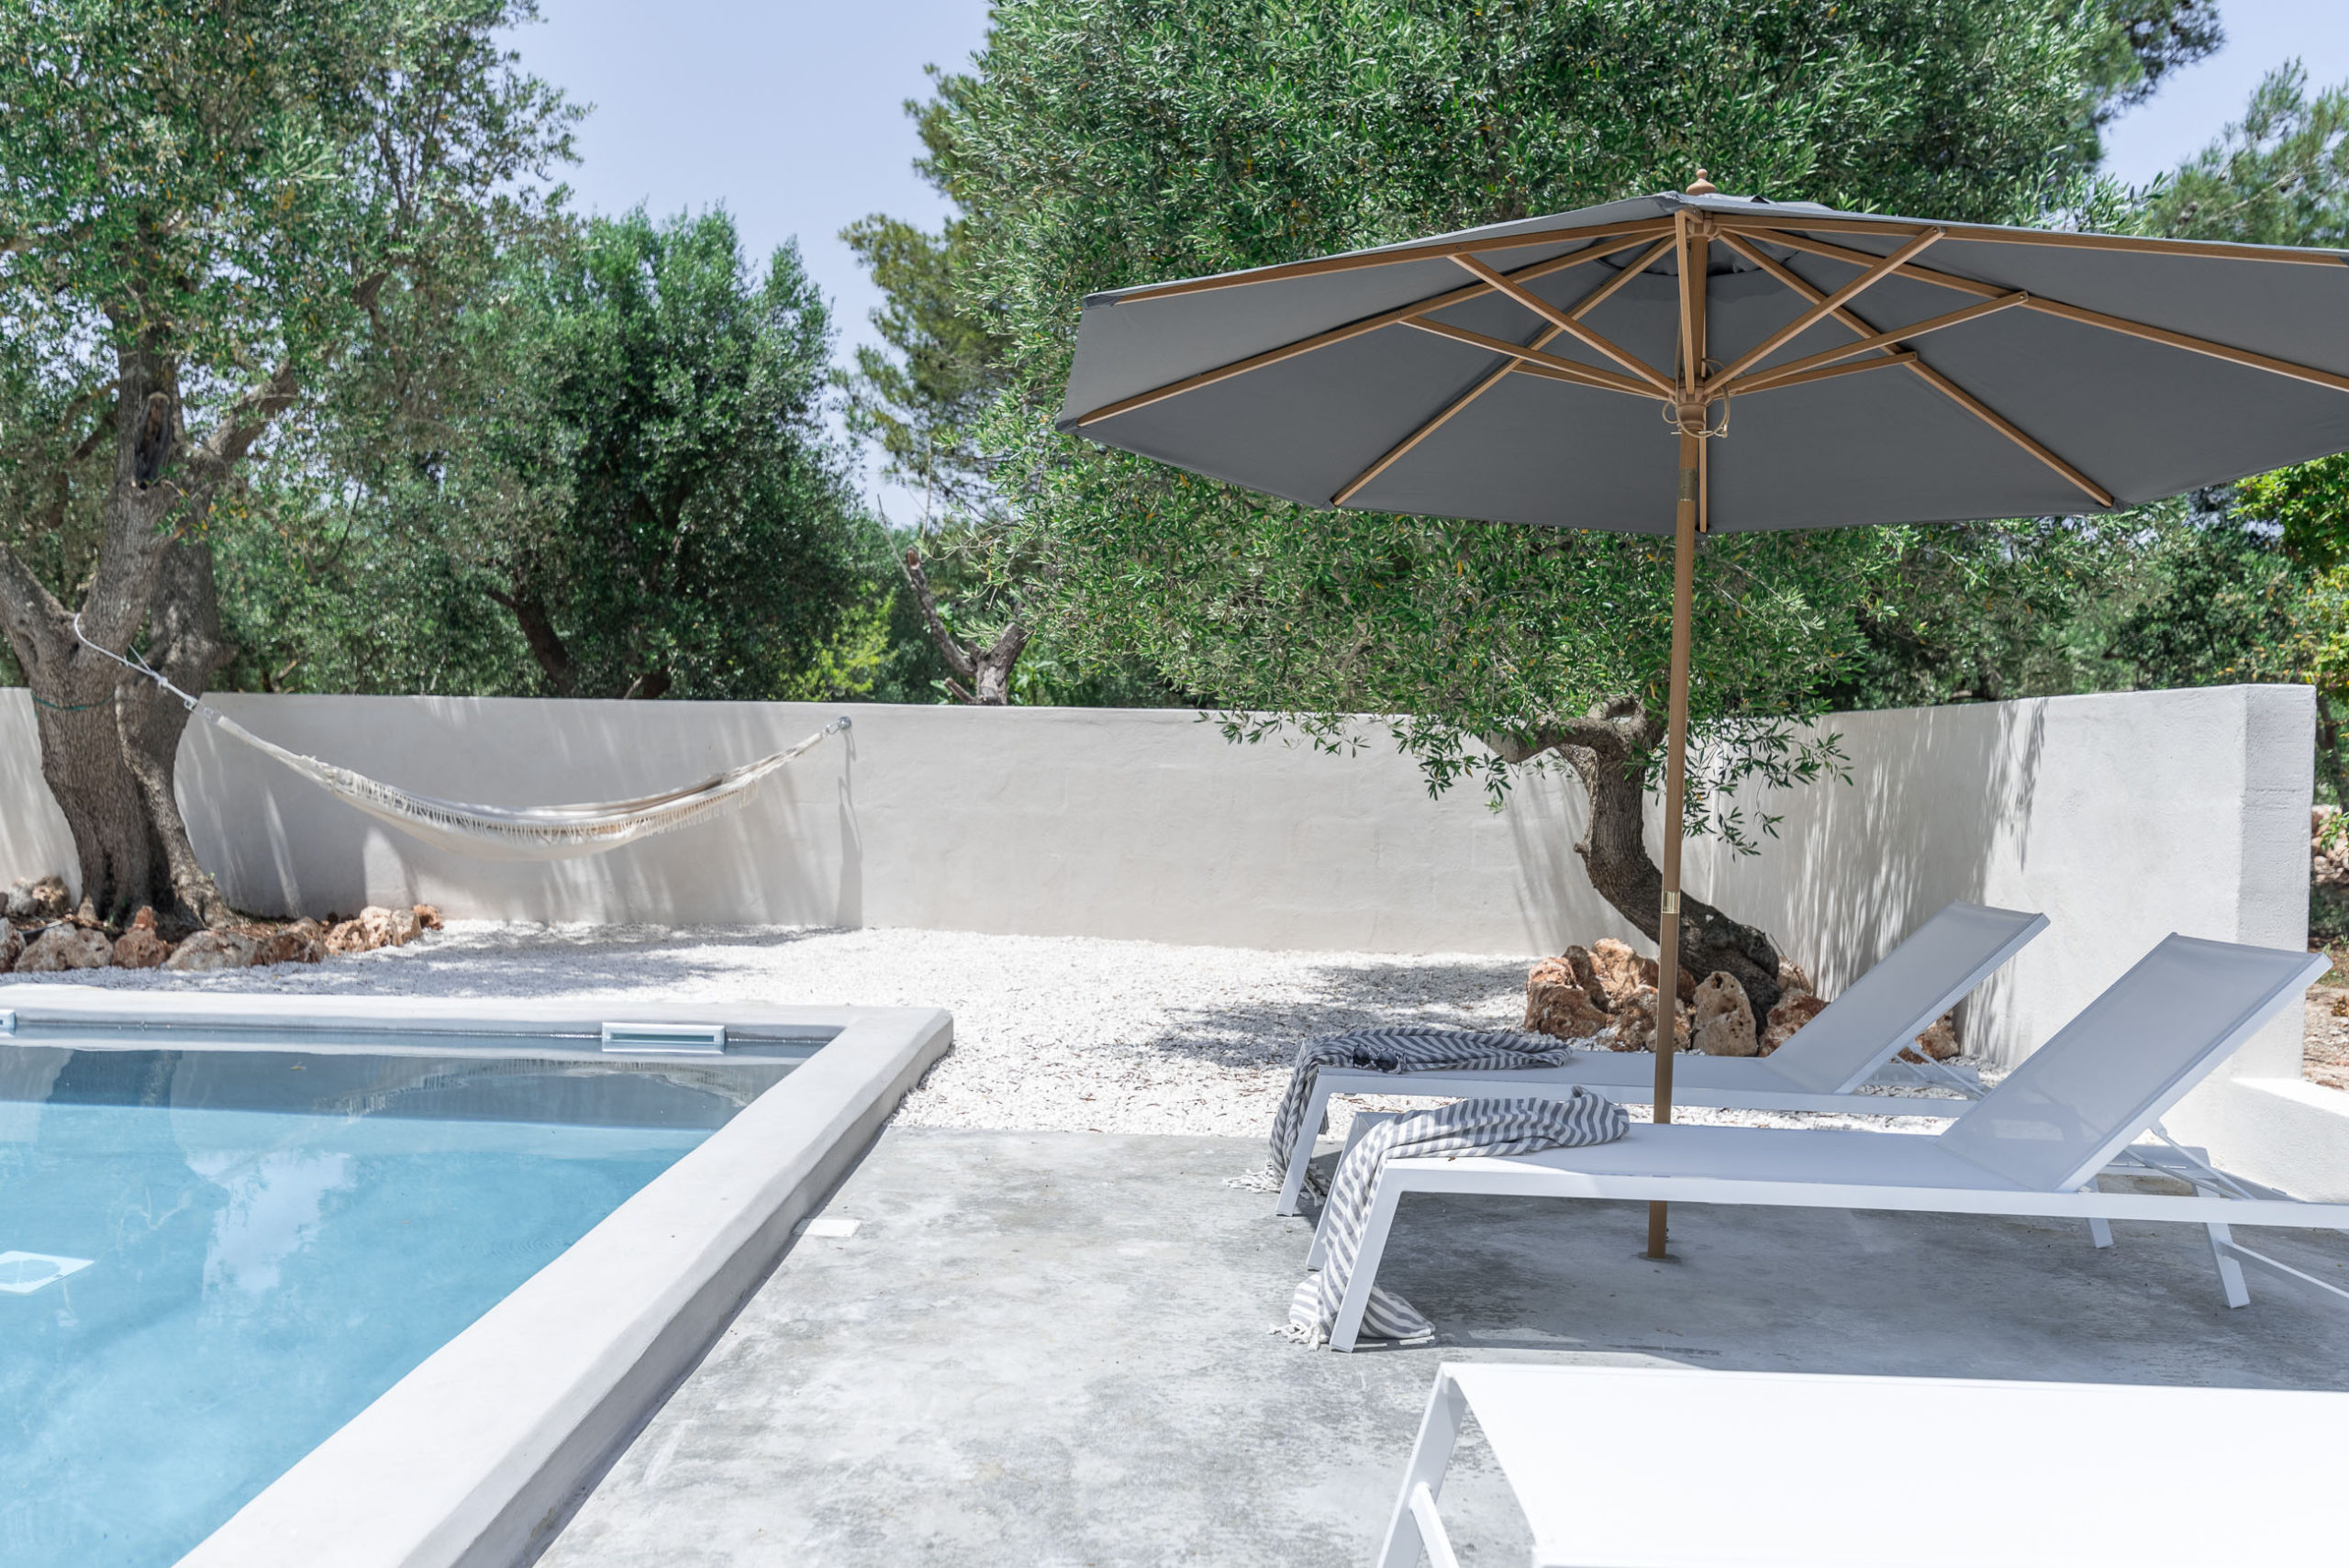 Villa Puglia is a modern holiday home for sale in the Puglian countryside